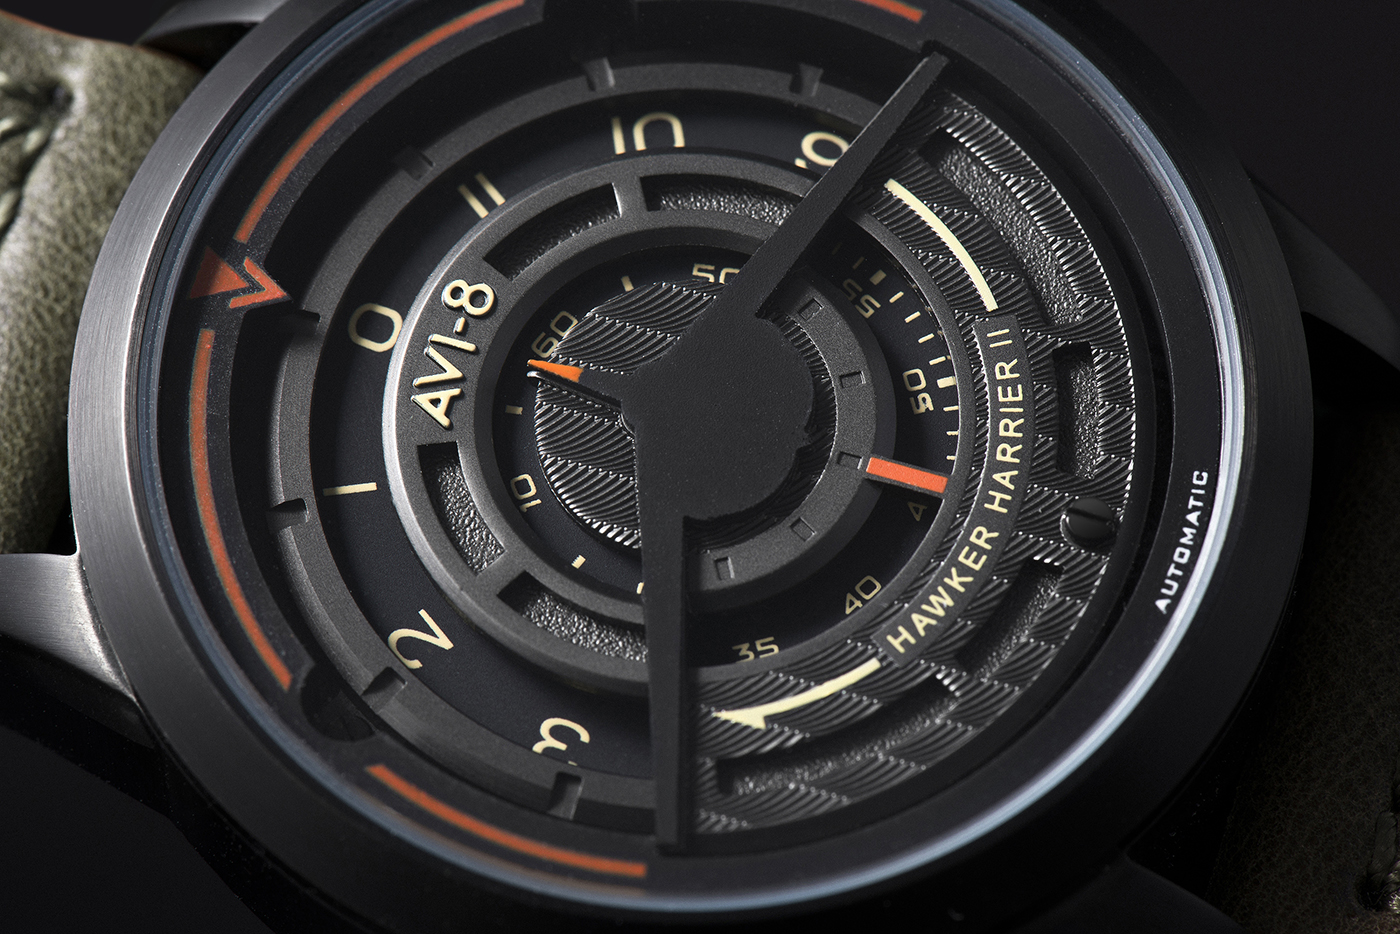 A close-up of the Titanium Carbide coated version of the AV 4047 Harrier II timepiece.